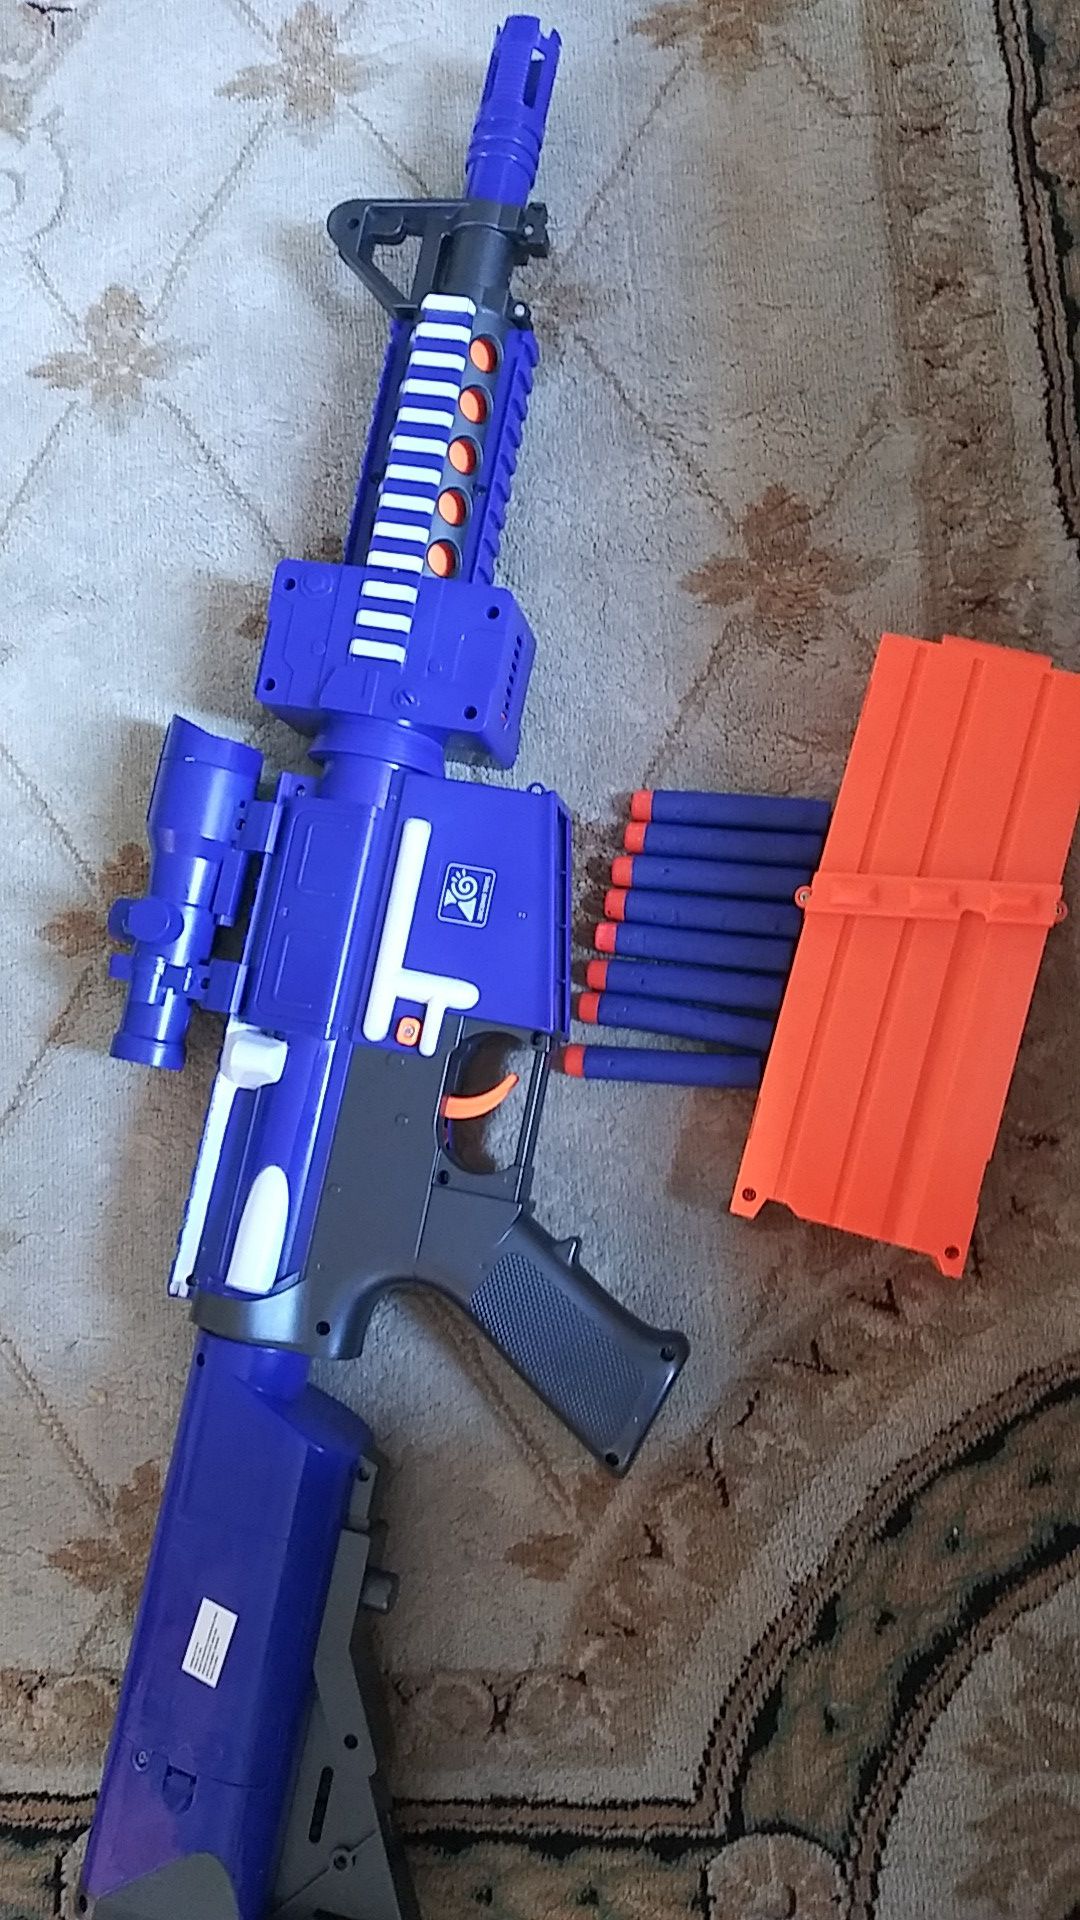 Nerf gun with 8 ammo and mag with scope.